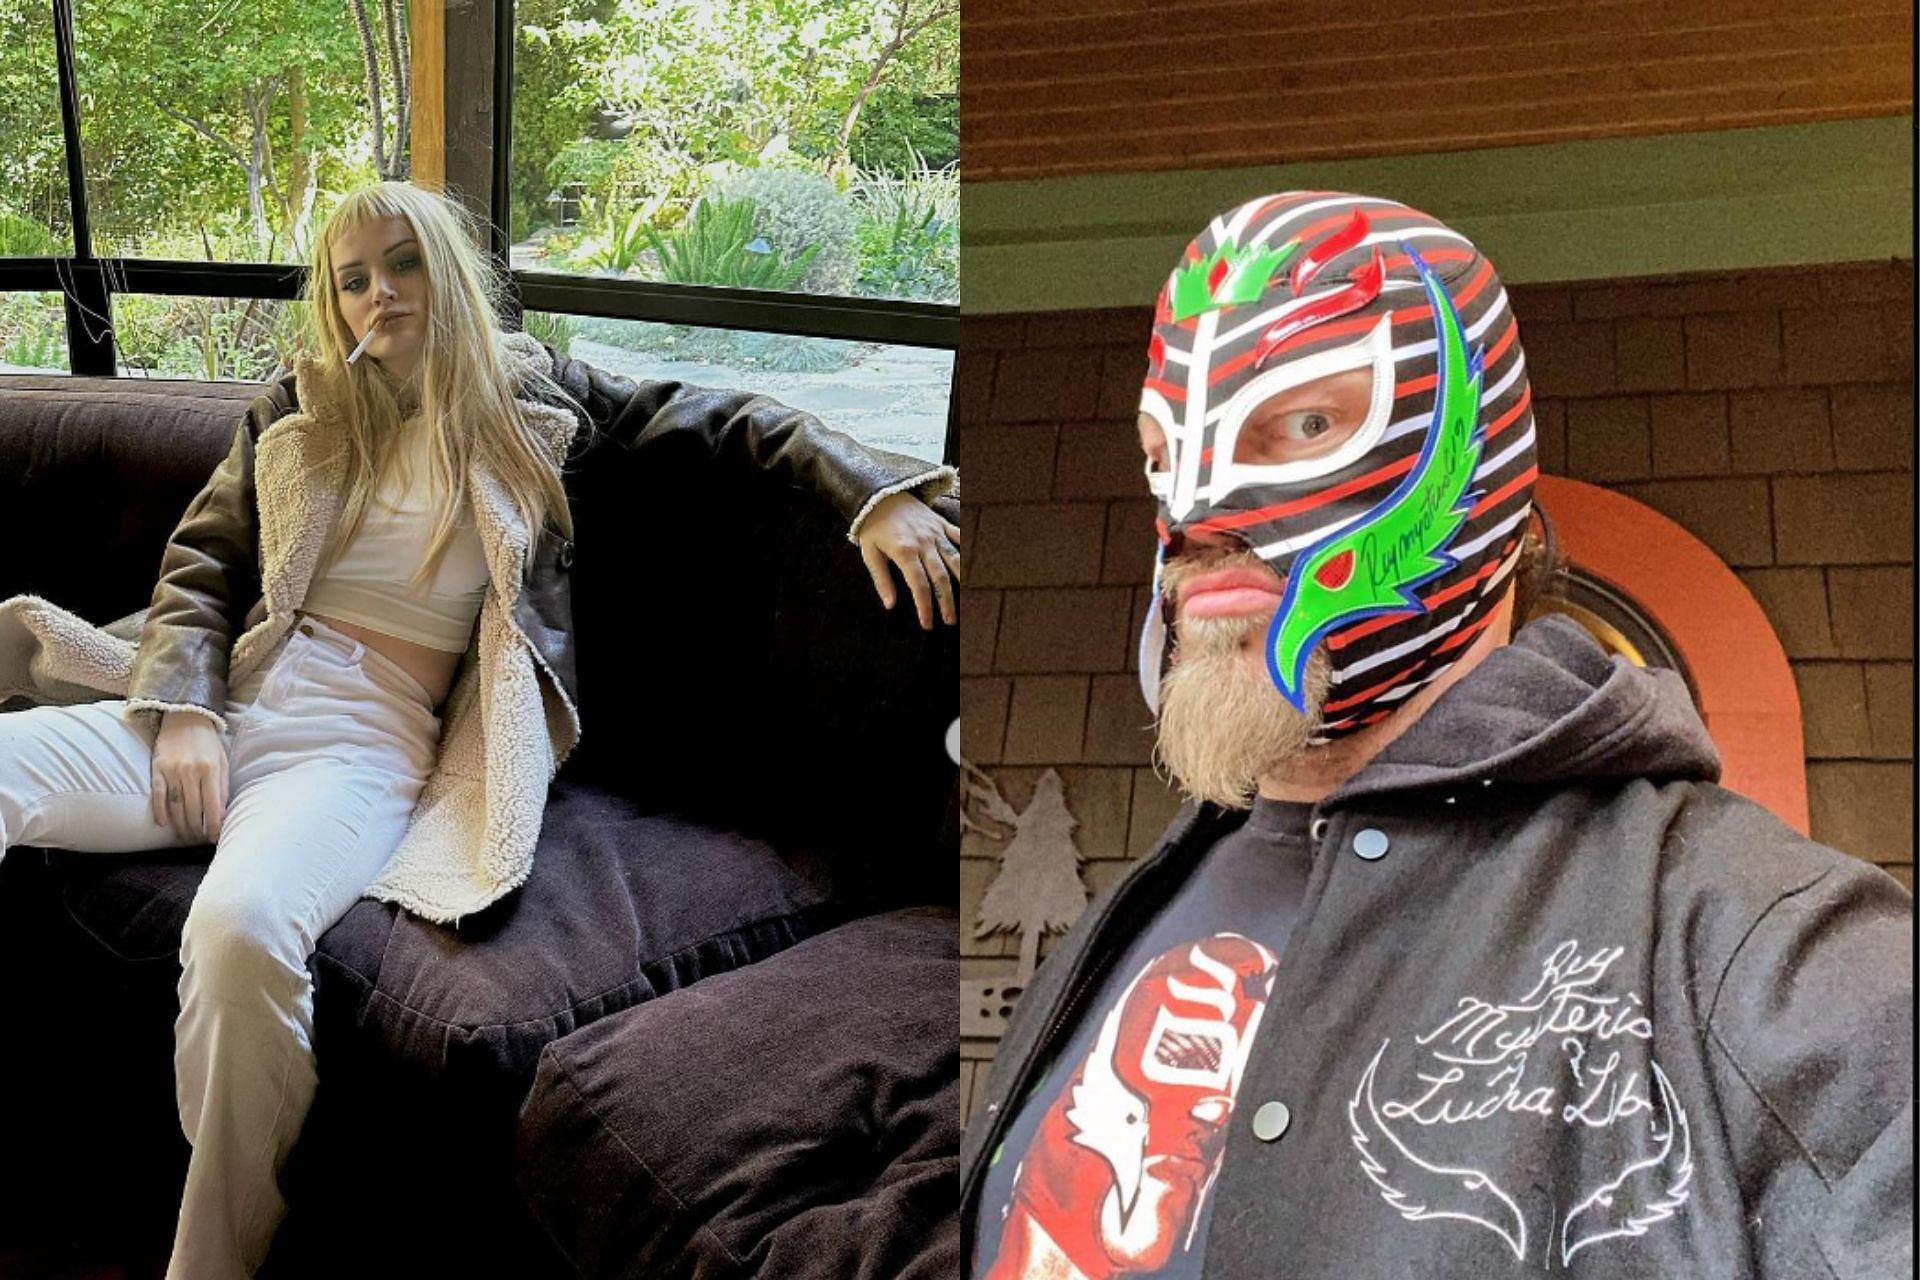 AEW stars was all dressed up for Halloween